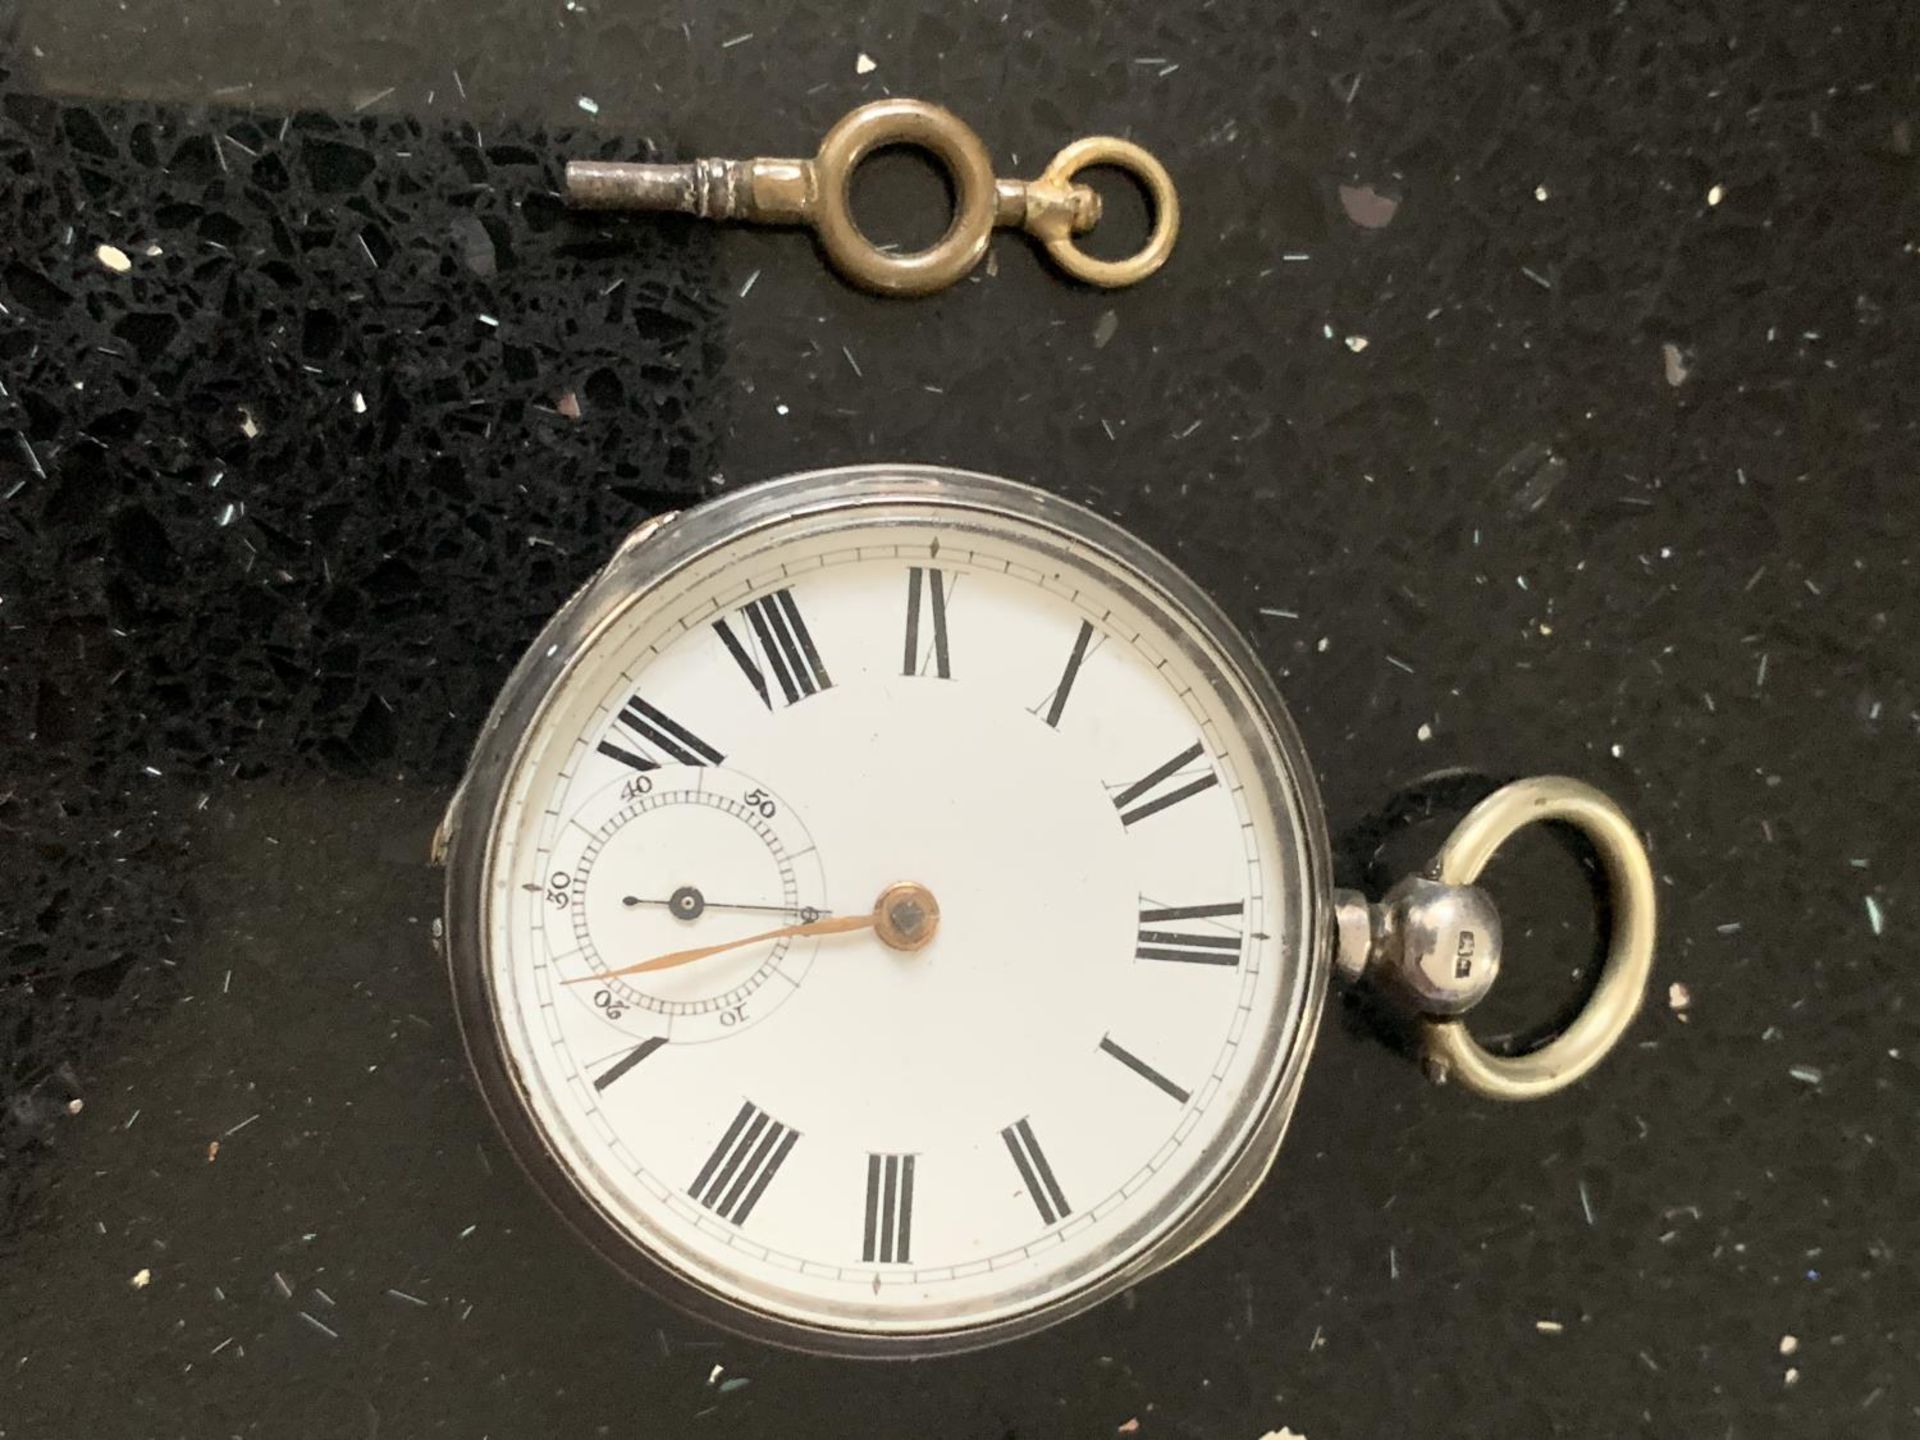 A HALLMARKED BIRMINGHAM SILVER POCKET WATCH WITH A WHITE ENAMEL DIAL AND ROMAN NUMERALS AND KEY (A/